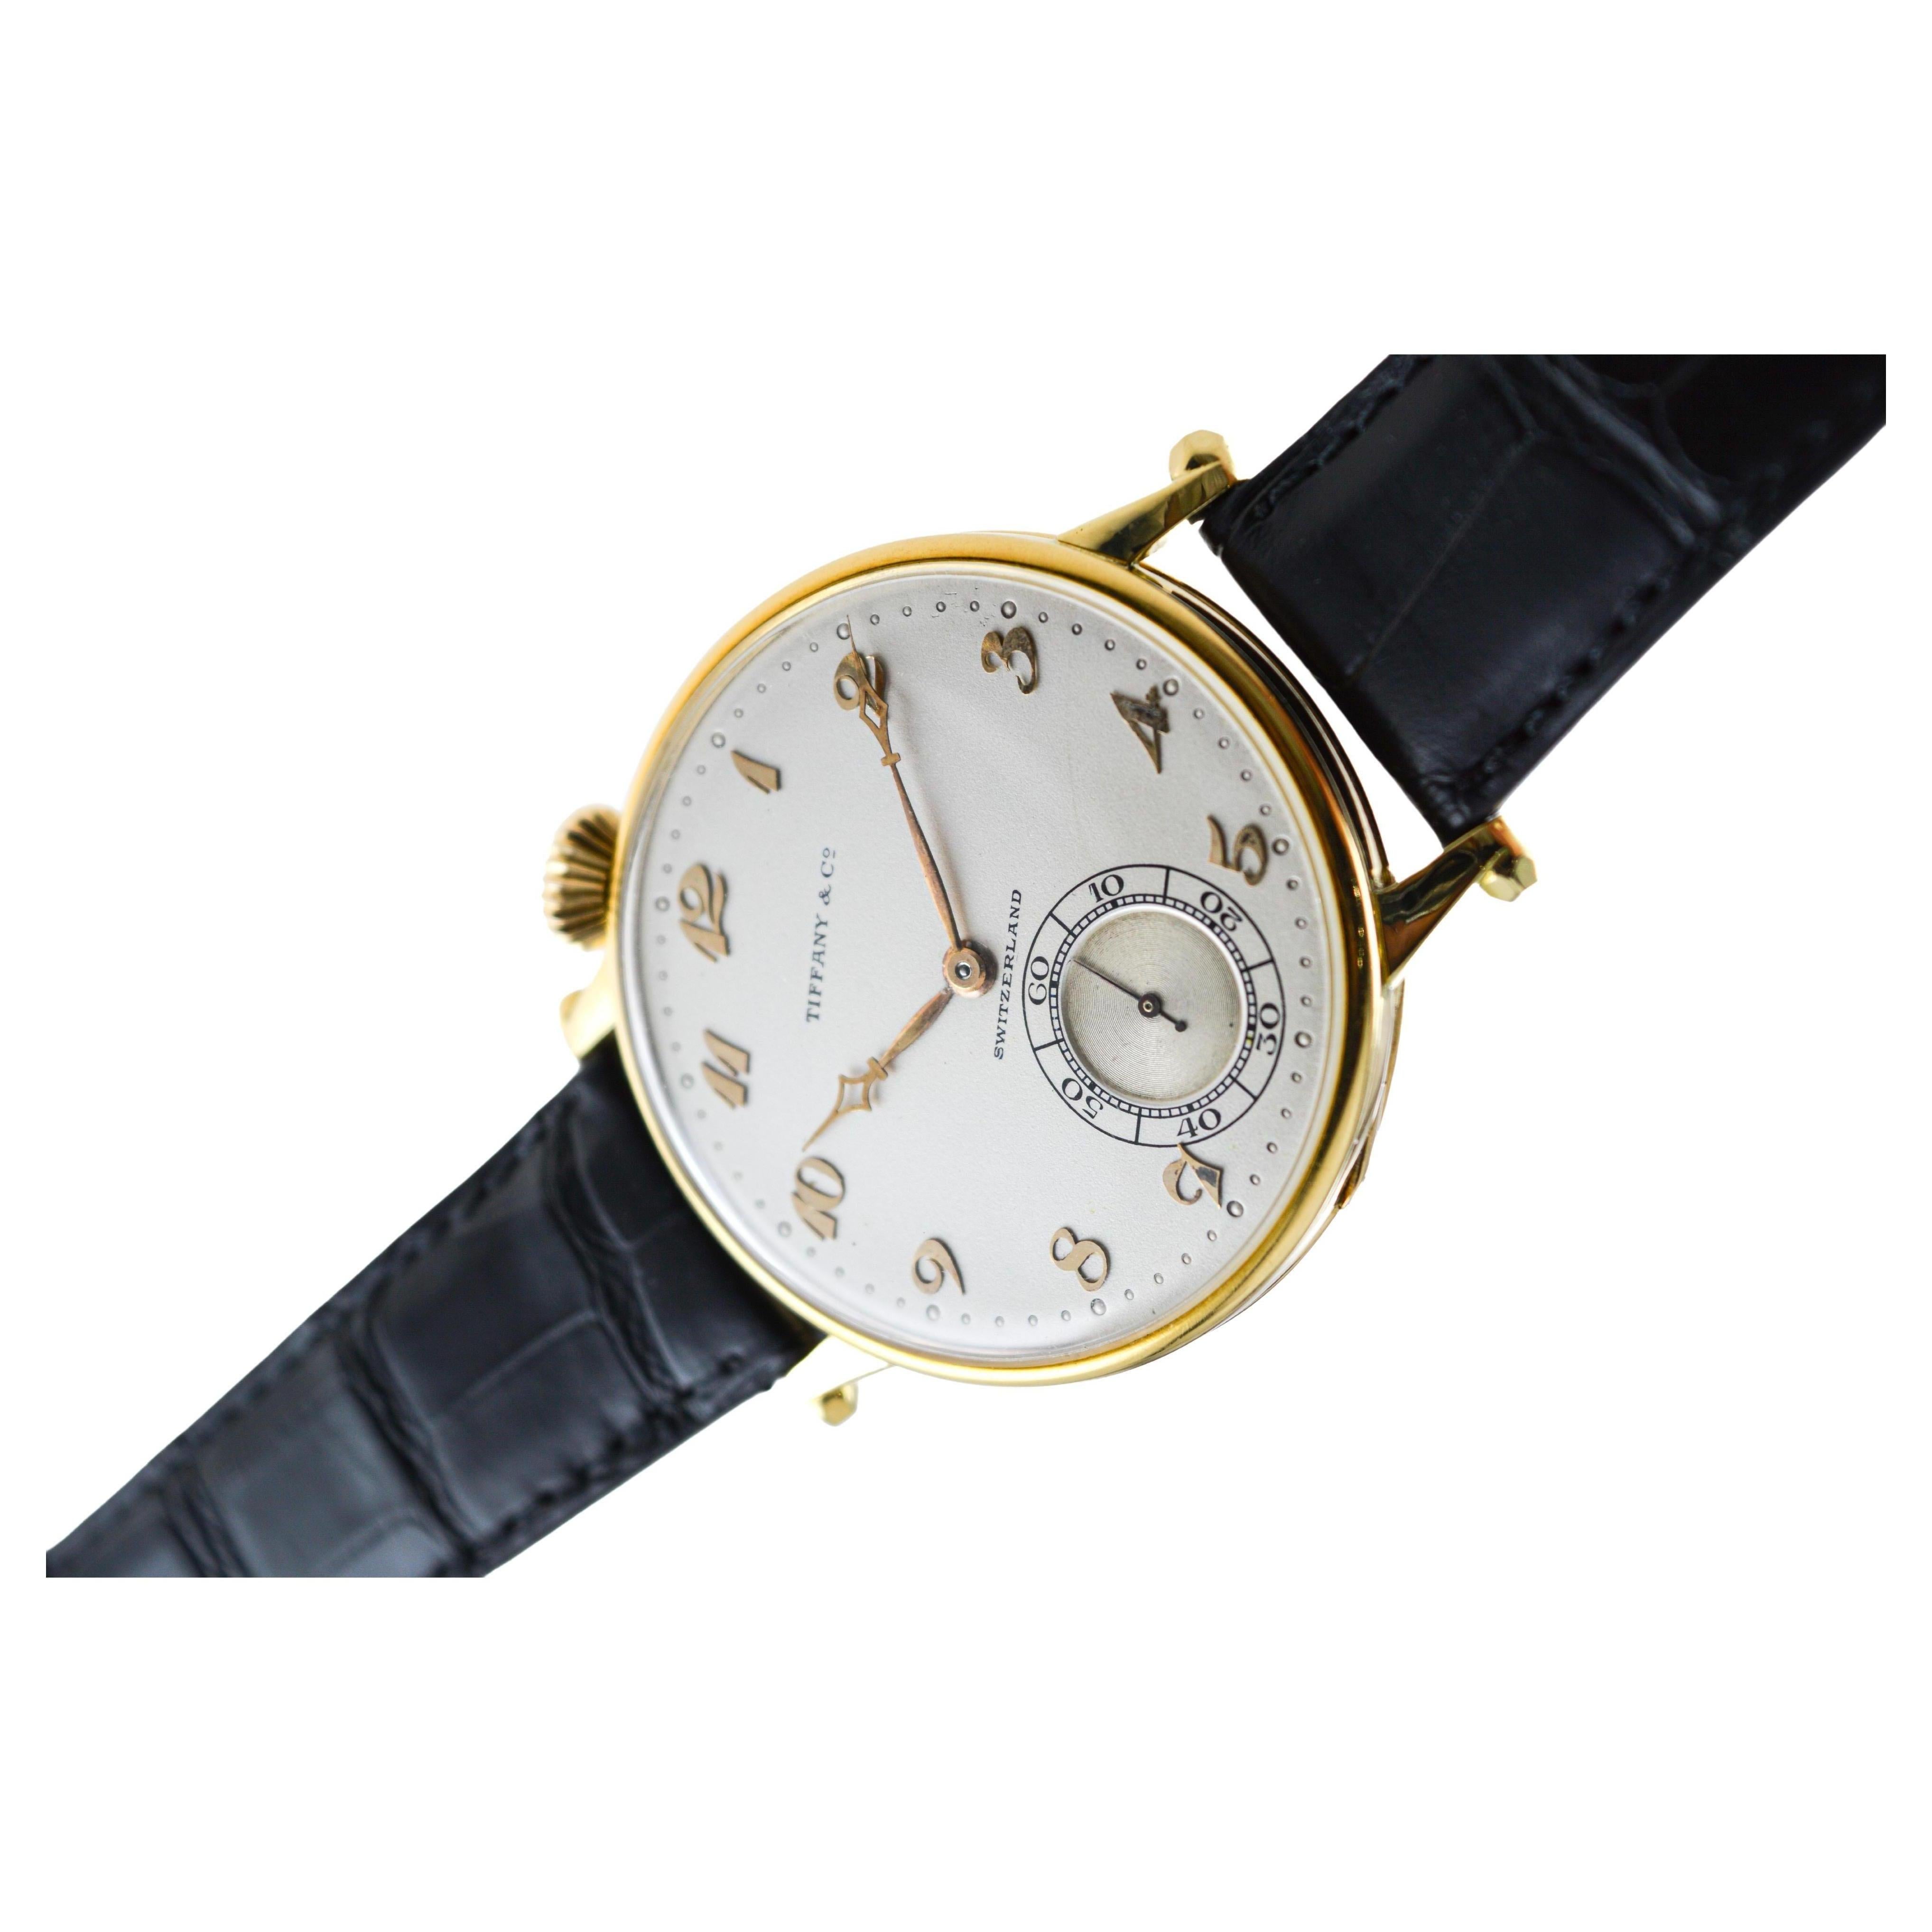 Agassiz 18Kt. Gold Oversized Watch for Tiffany & Co. Stern Freres Dial 1920's For Sale 2